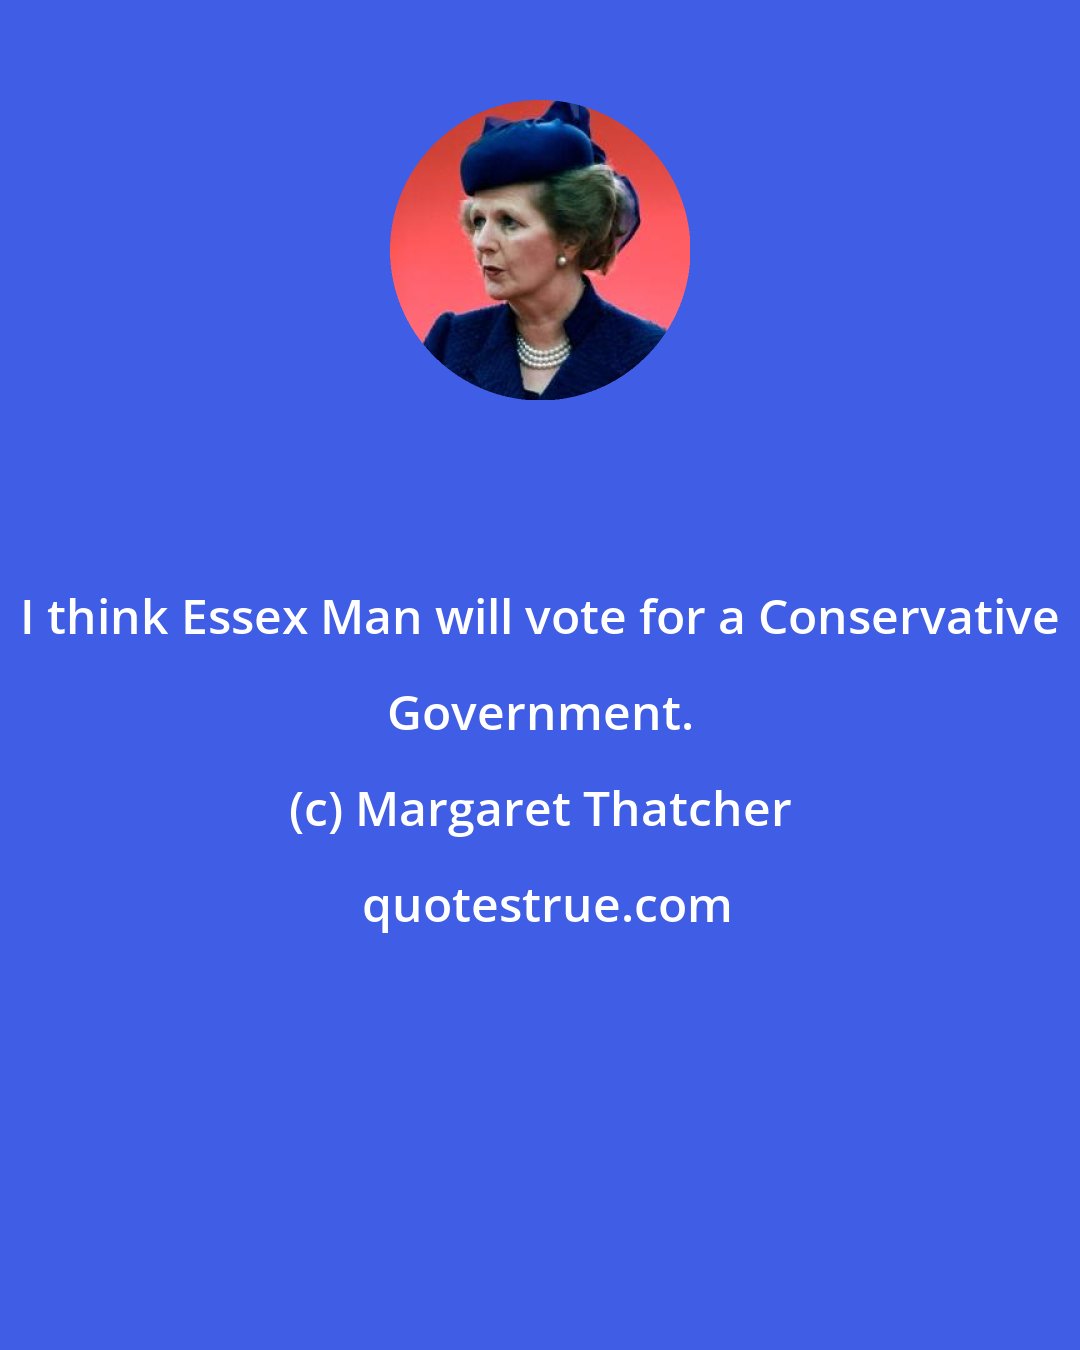 Margaret Thatcher: I think Essex Man will vote for a Conservative Government.